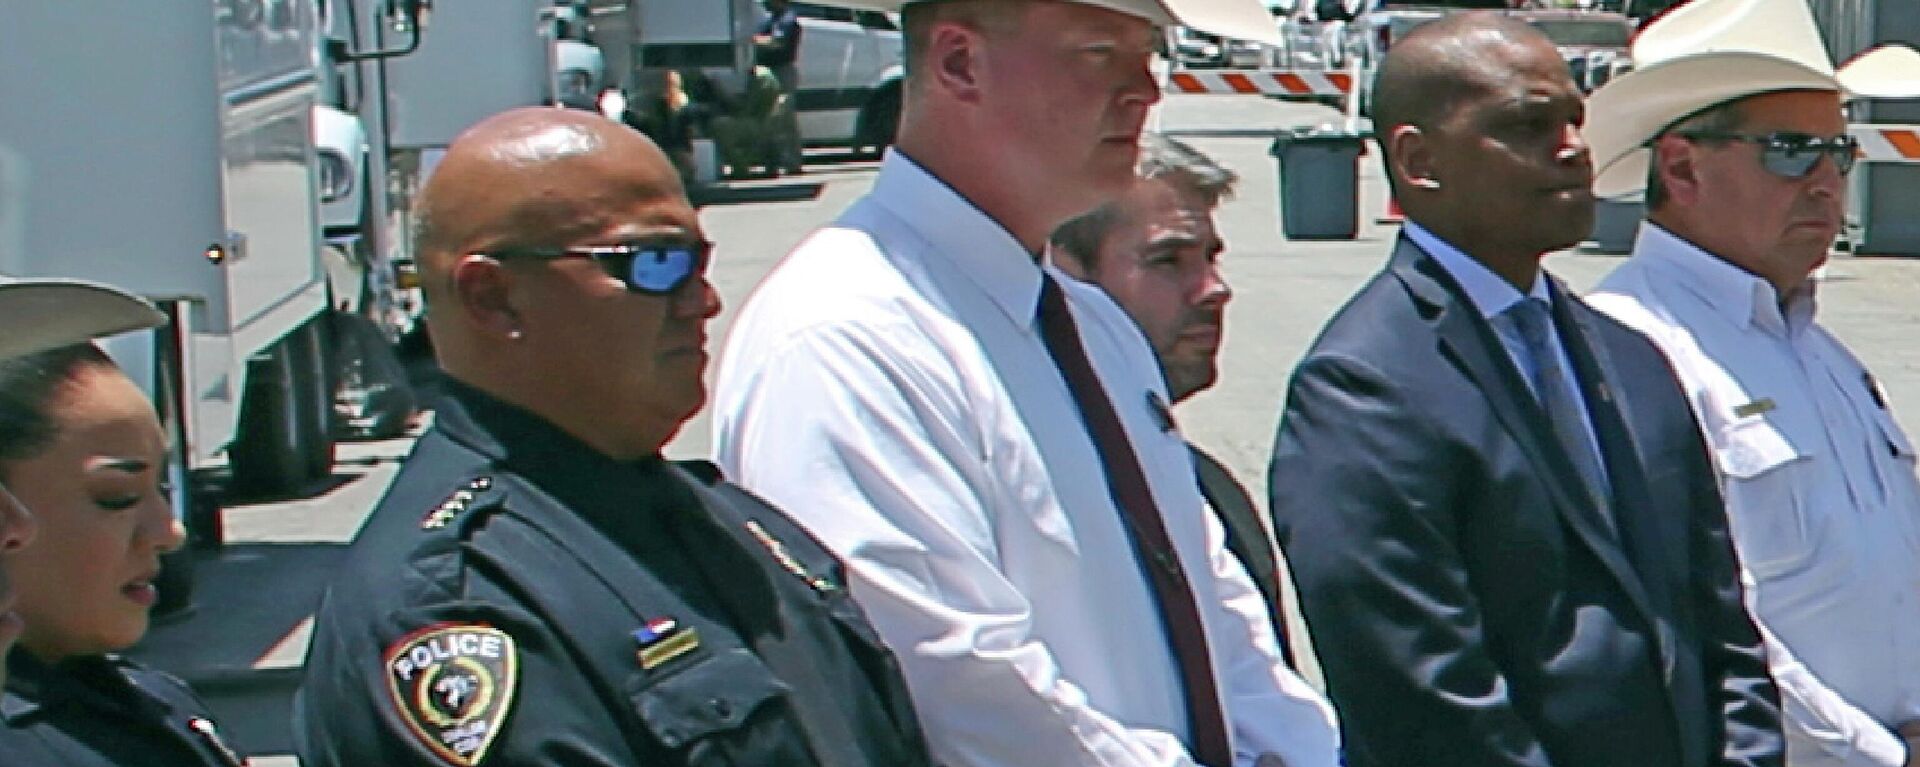 Uvalde School Police Chief Pete Arredondo, second from left, stands during a news conference outside of the Robb Elementary school in Uvalde, Texas, on May 26, 2022. The Uvalde school district’s police chief has stepped down from his position in the City Council just weeks after being sworn in following allegations that he erred in his response to the mass shooting at Robb Elementary School that left 19 students and two teachers dead.   - Sputnik International, 1920, 26.08.2022